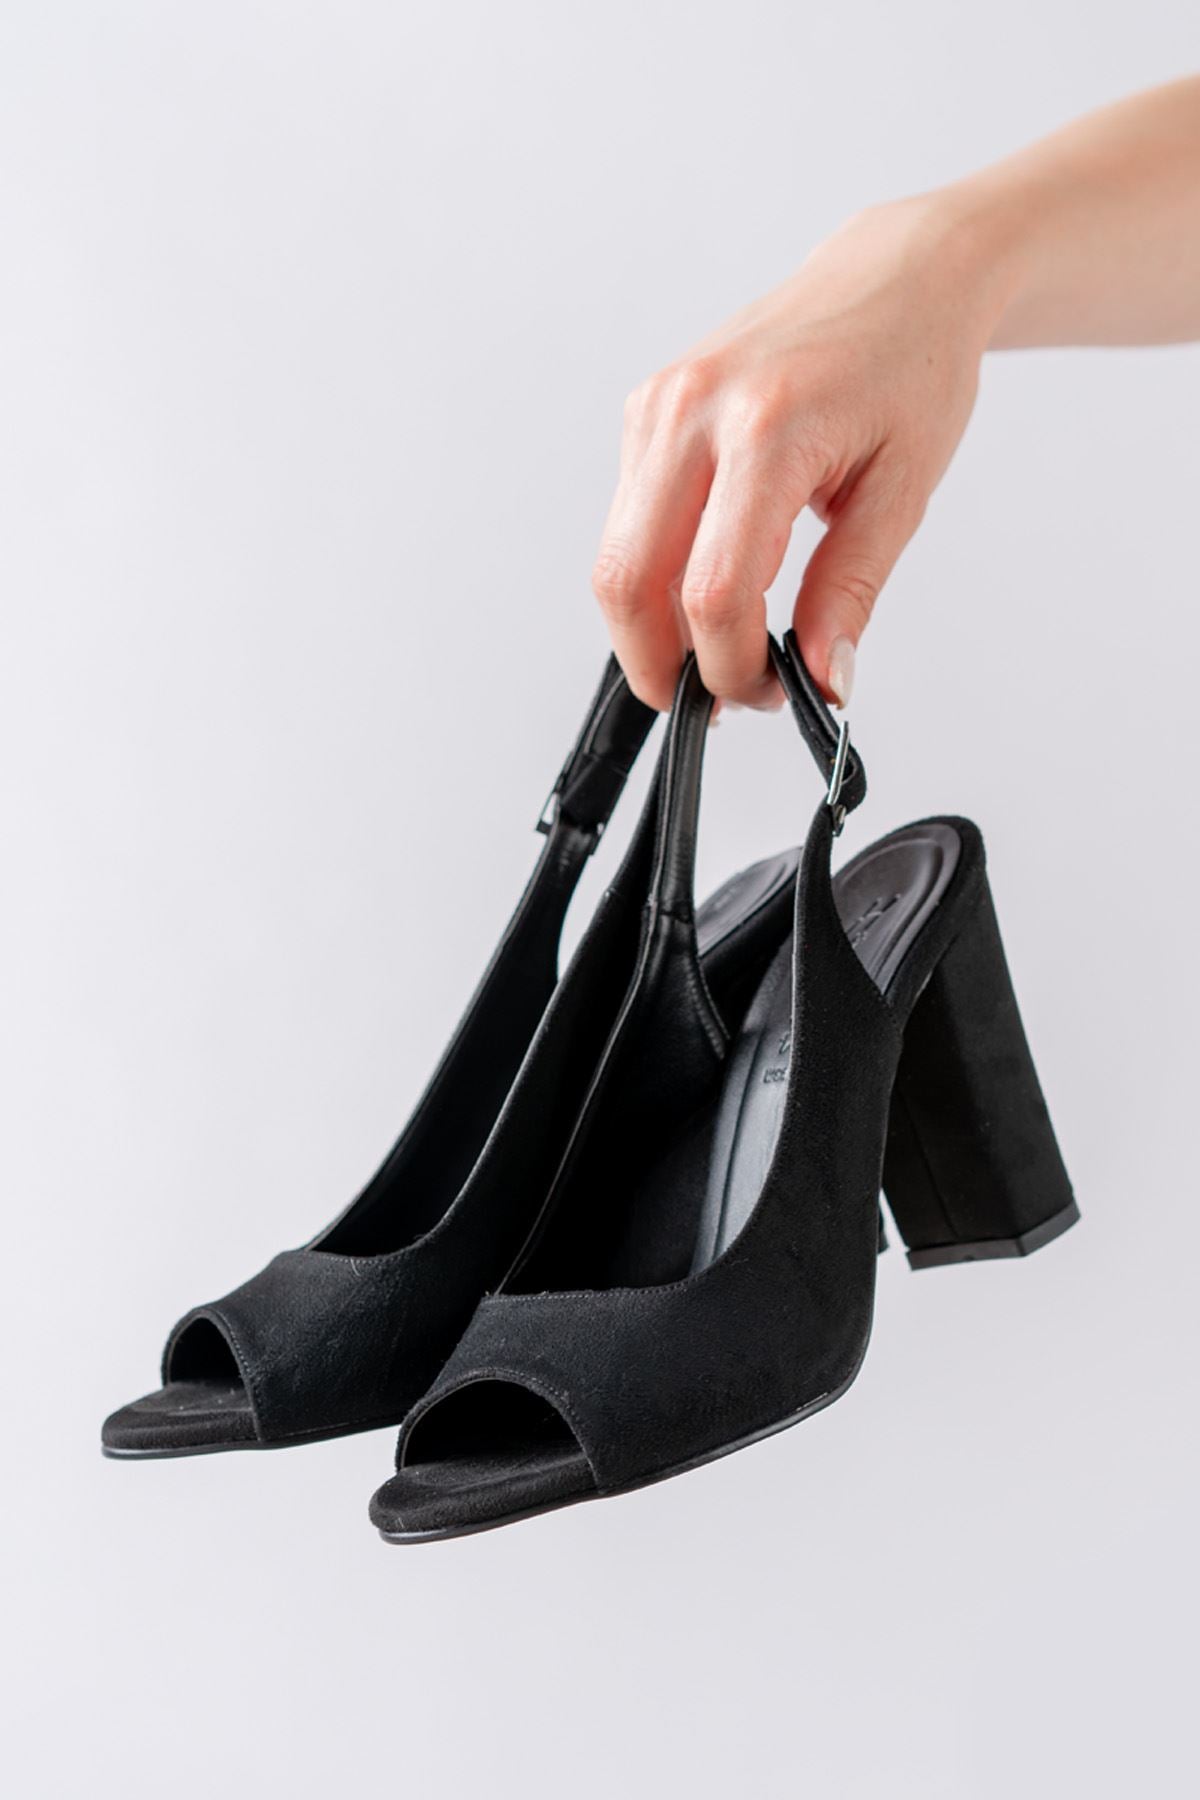 Meira Black Suede Detailed Low Heel Women's Shoes - STREETMODE™